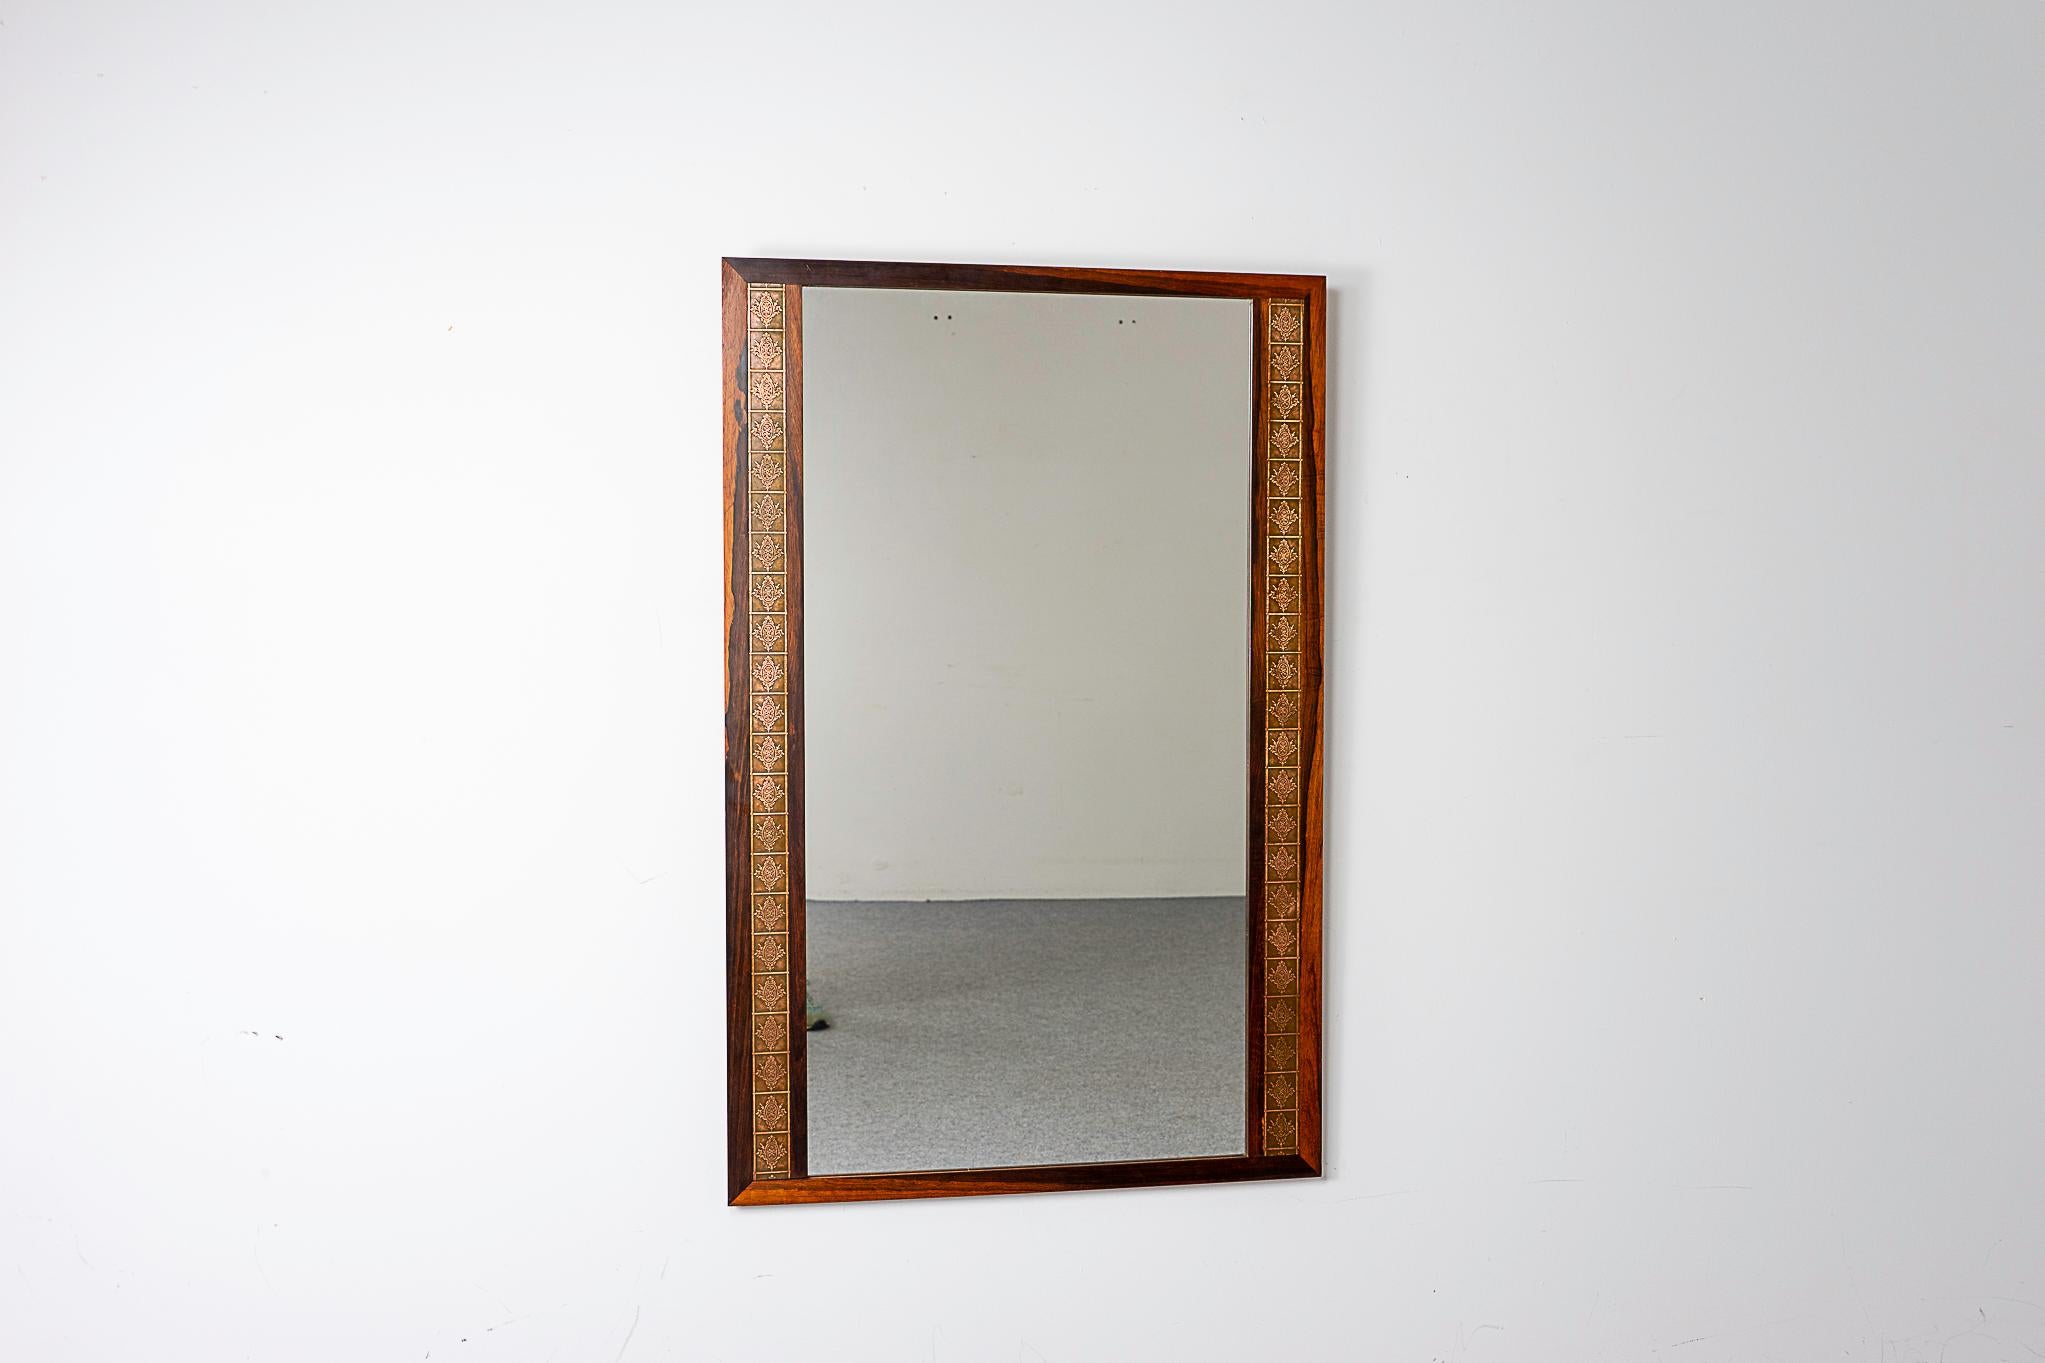 Rosewood & copper Danish mirror, circa 1960's. The perfect compliment to any interior especially in small apartments, condos and lofts where space can be tight. Decorative embossed metal trim on both sides.

Please inquire for remote and